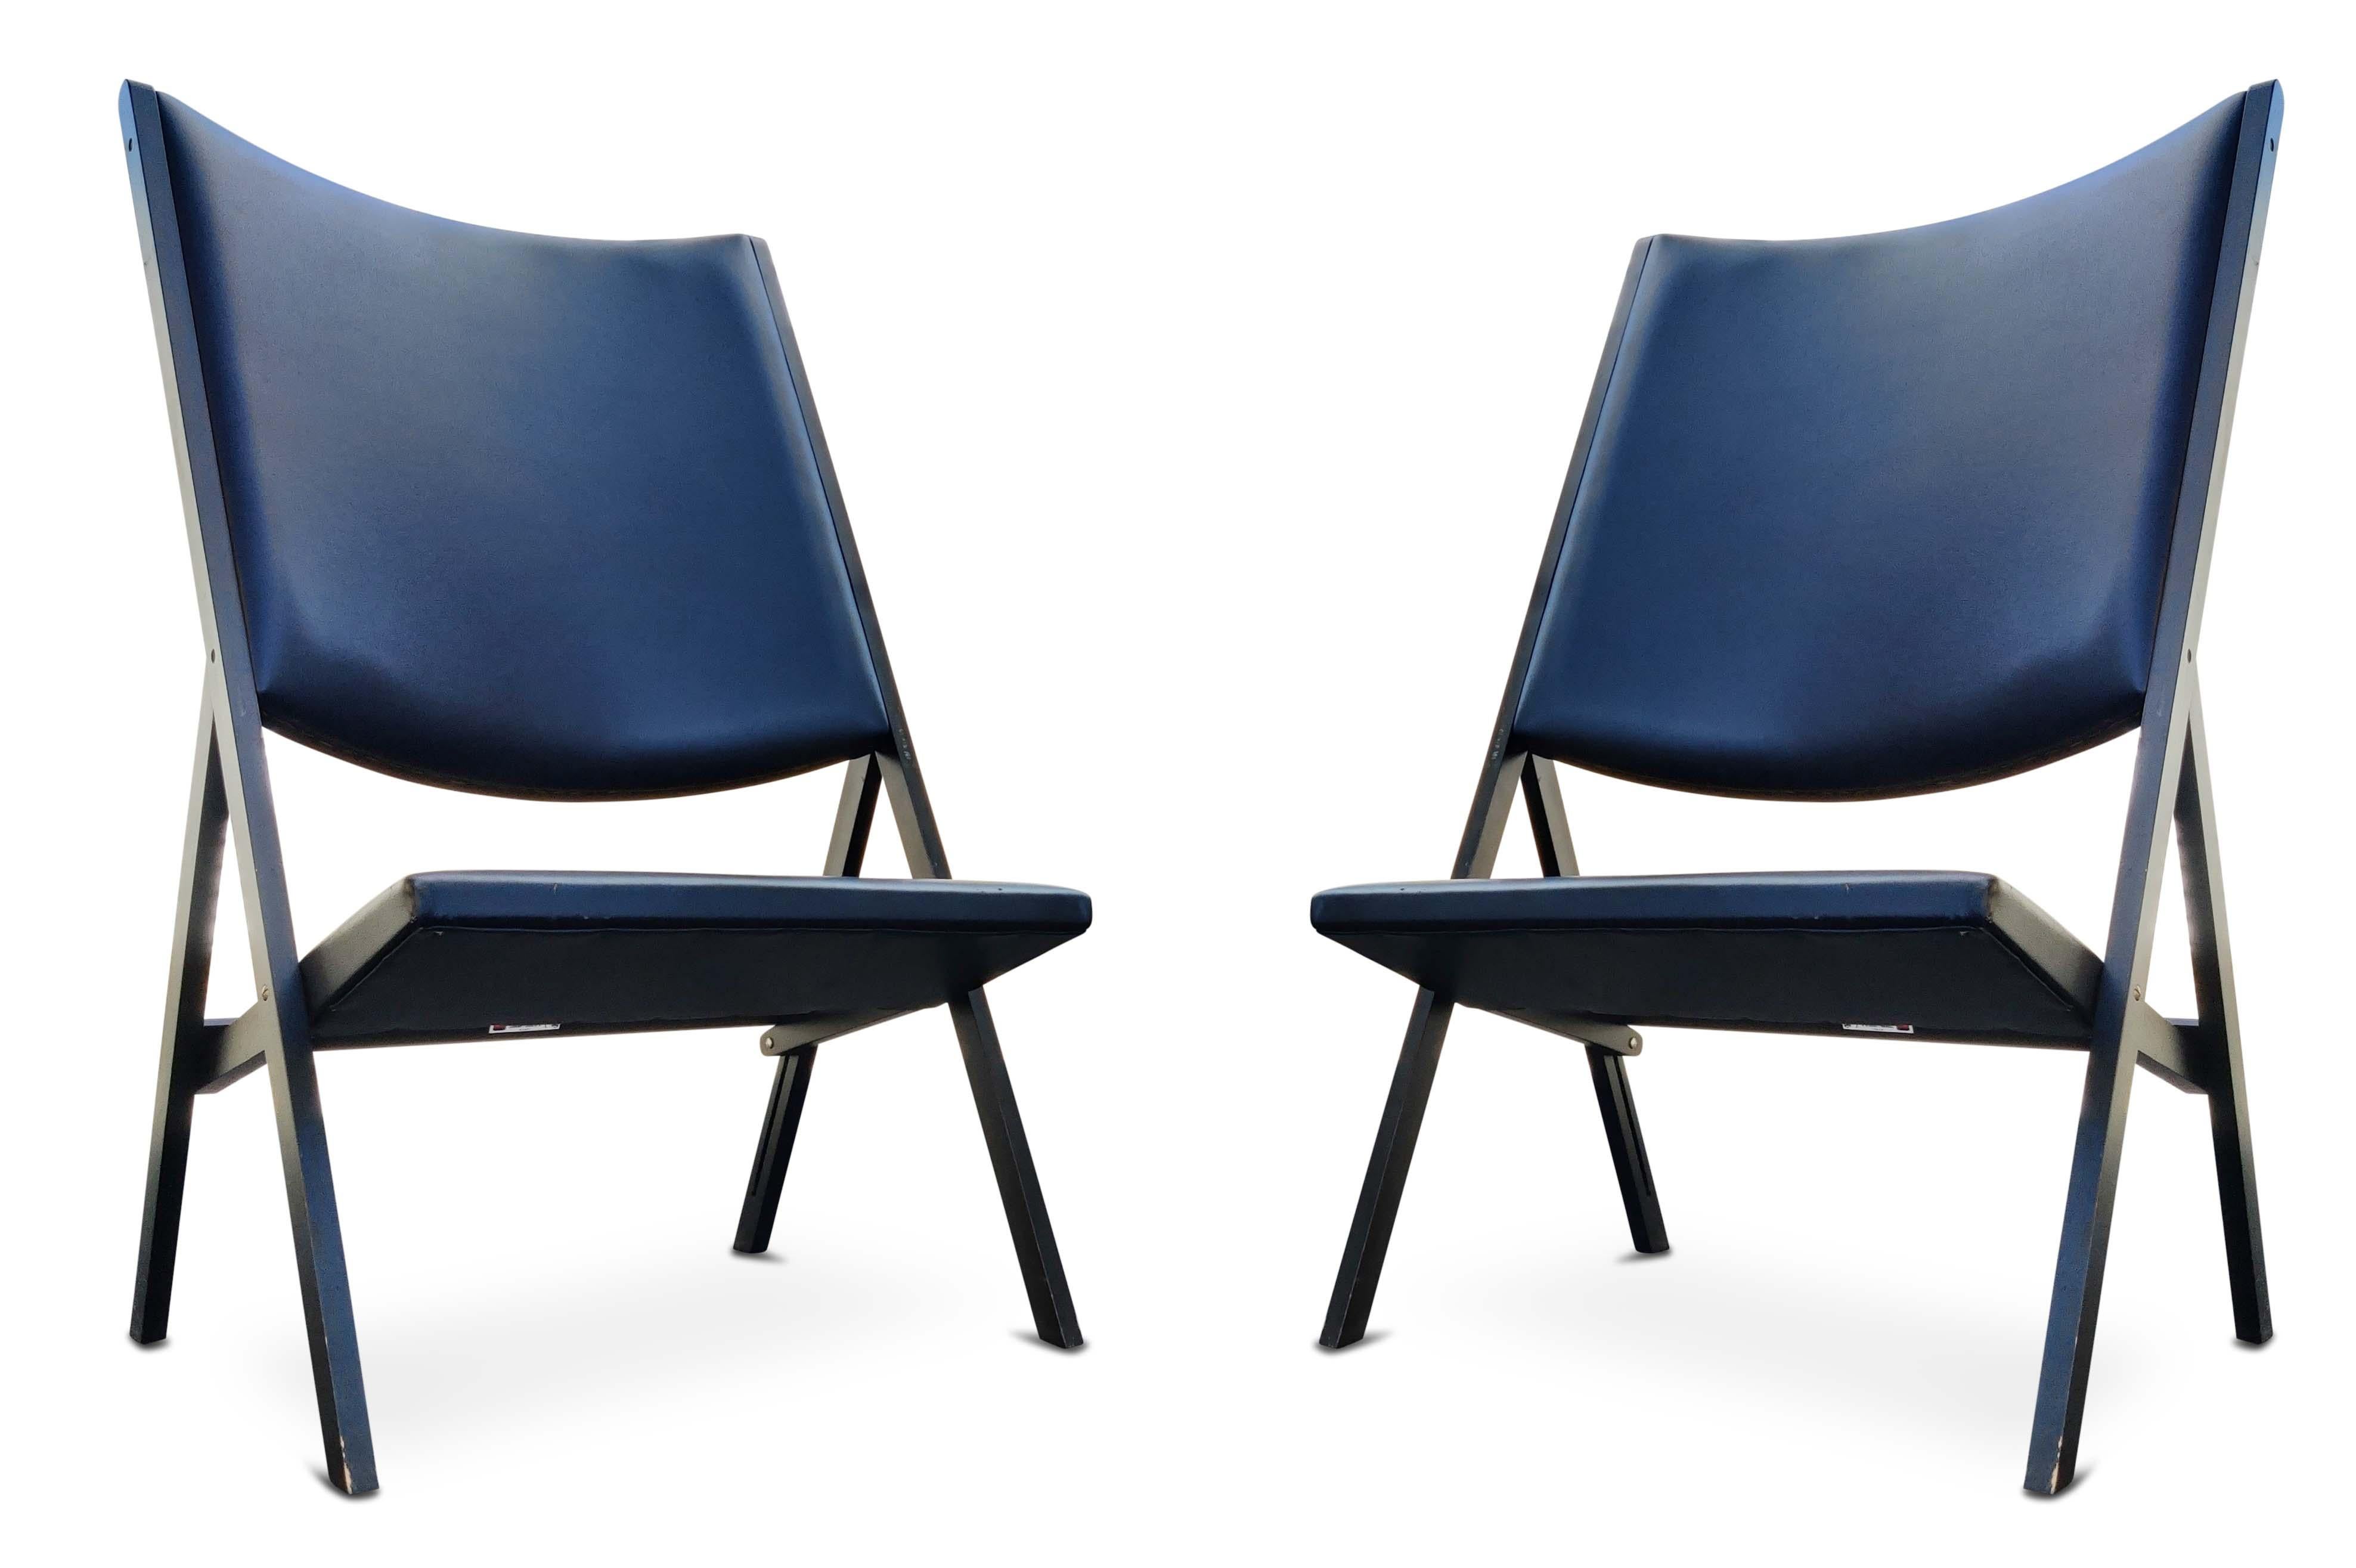 An absolutely beautiful and very rare pair of folding chairs from iconic designer Gio Ponti. Produced by also iconic manufacturer Walter Ponti. In original condition, a standout feature of these lounge chairs is the proportionally tall and dramatic